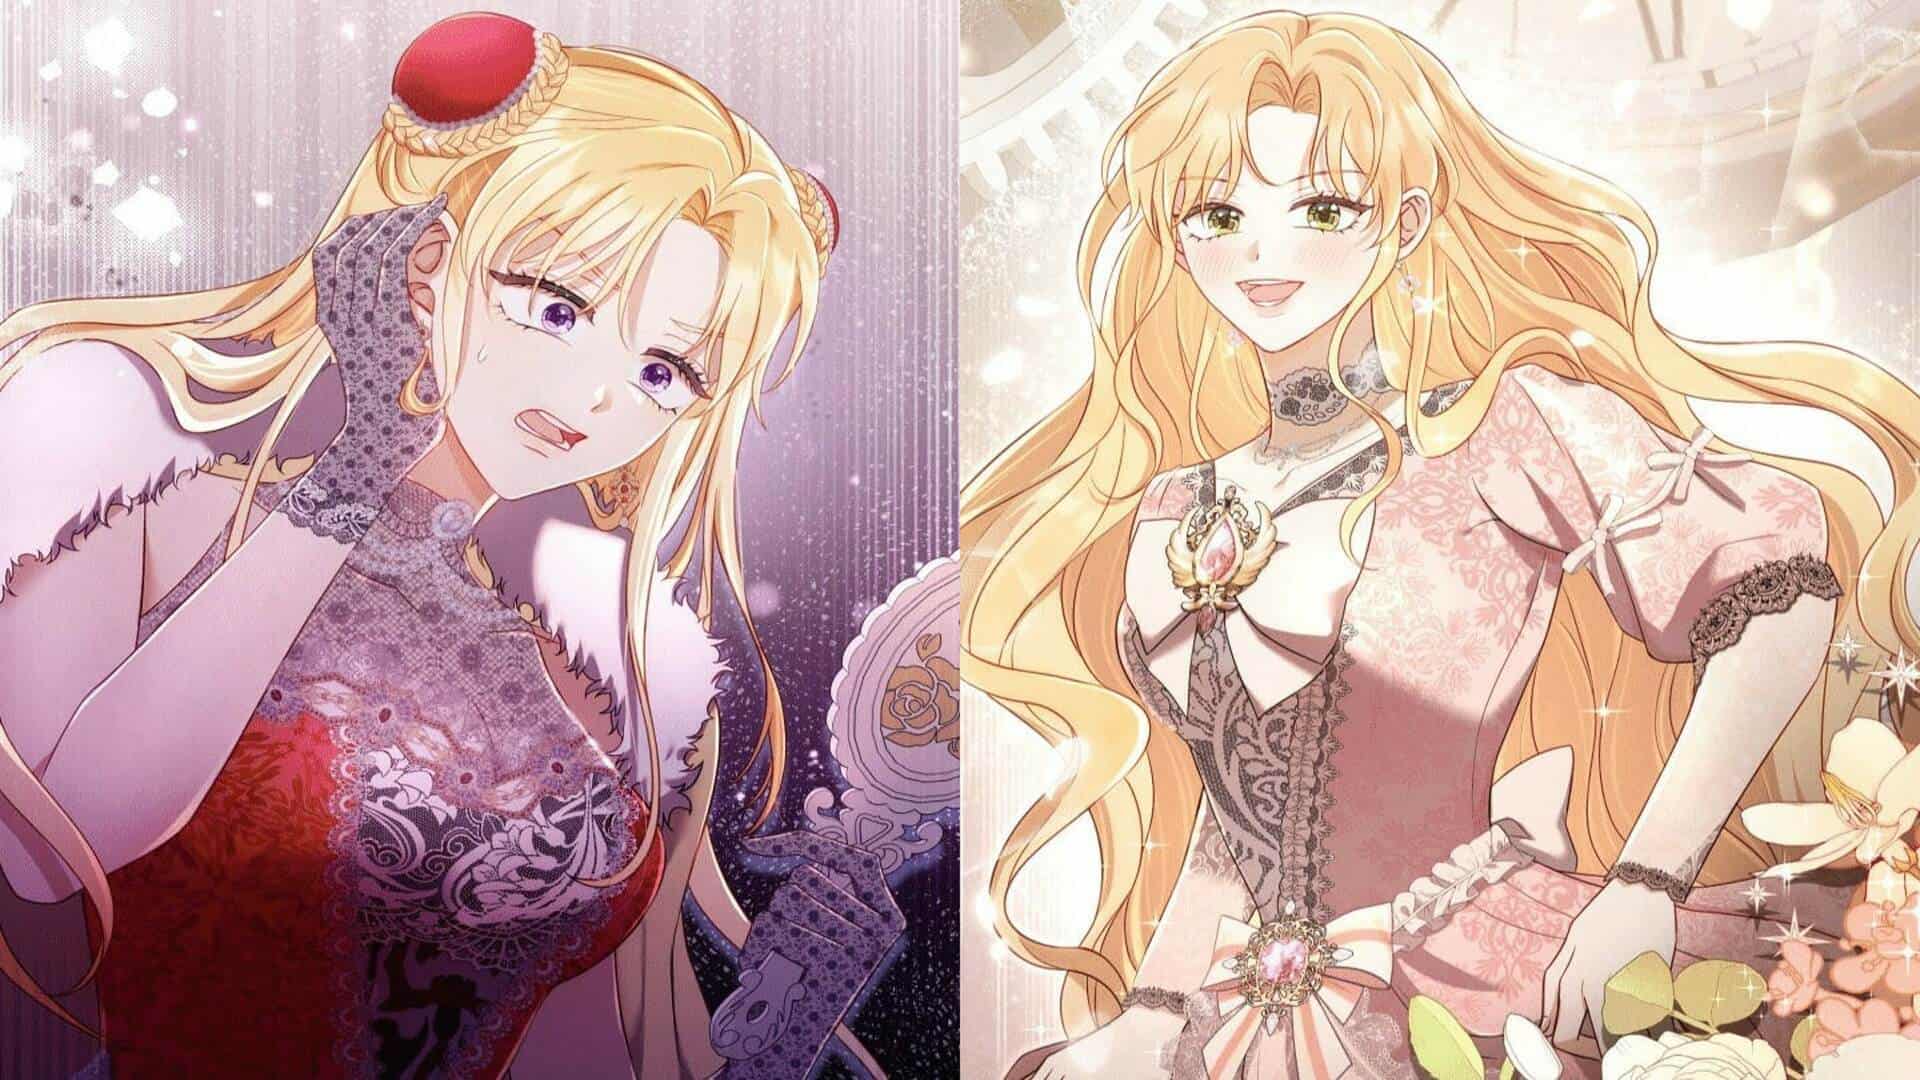 Princess Millia De Lua Before And After She Regressed Into Queen Gloria De Lua's Body - Requiem For The Queen Chapter 2 (Credits: Kakao Page)